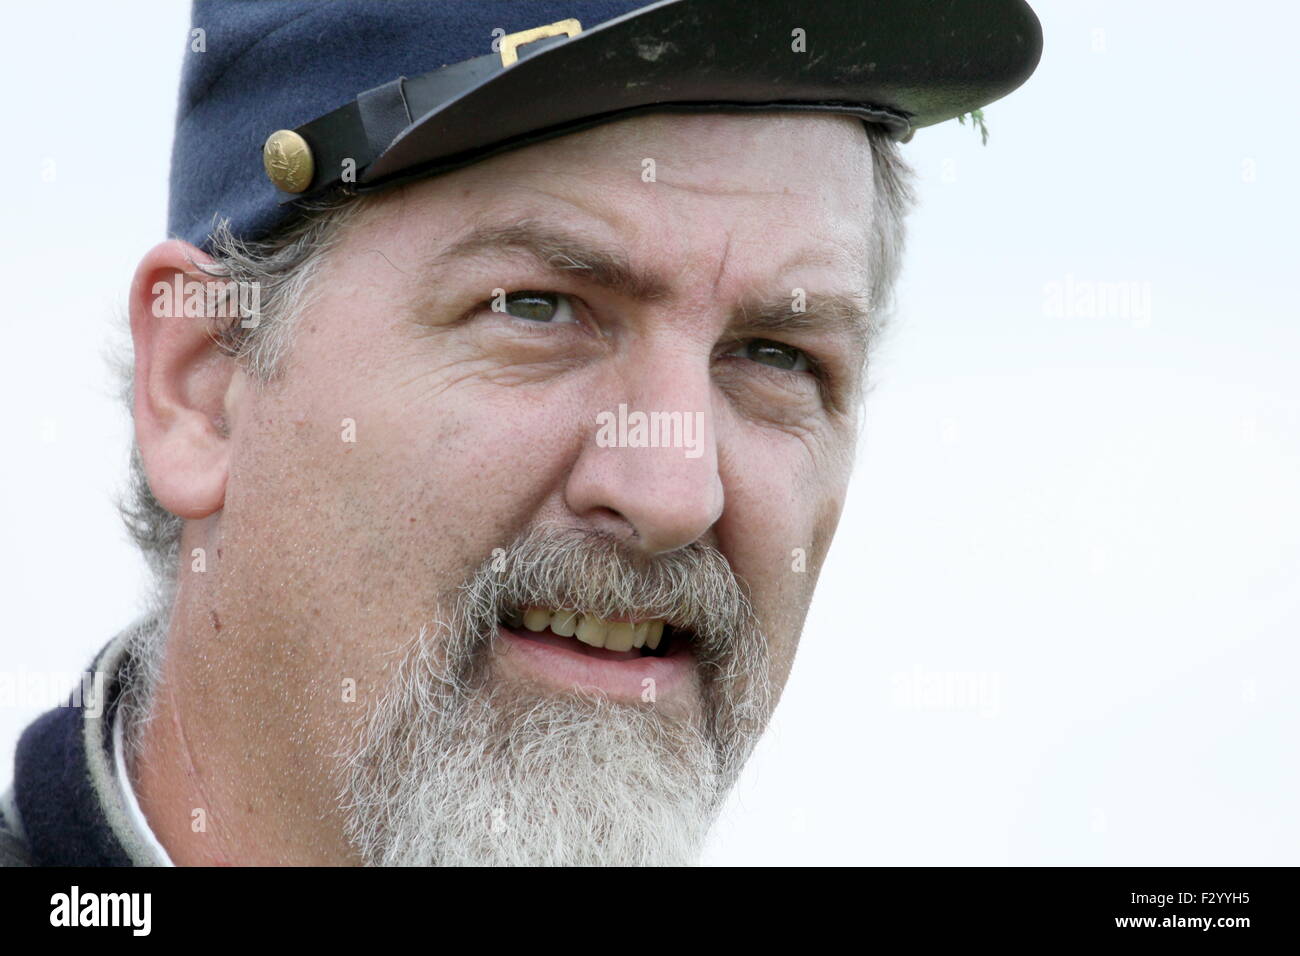 Closeup of a Union Civil War reenactor at the 150th anniversary of the Battle of Gettysburg, June 28, 2013. Stock Photo